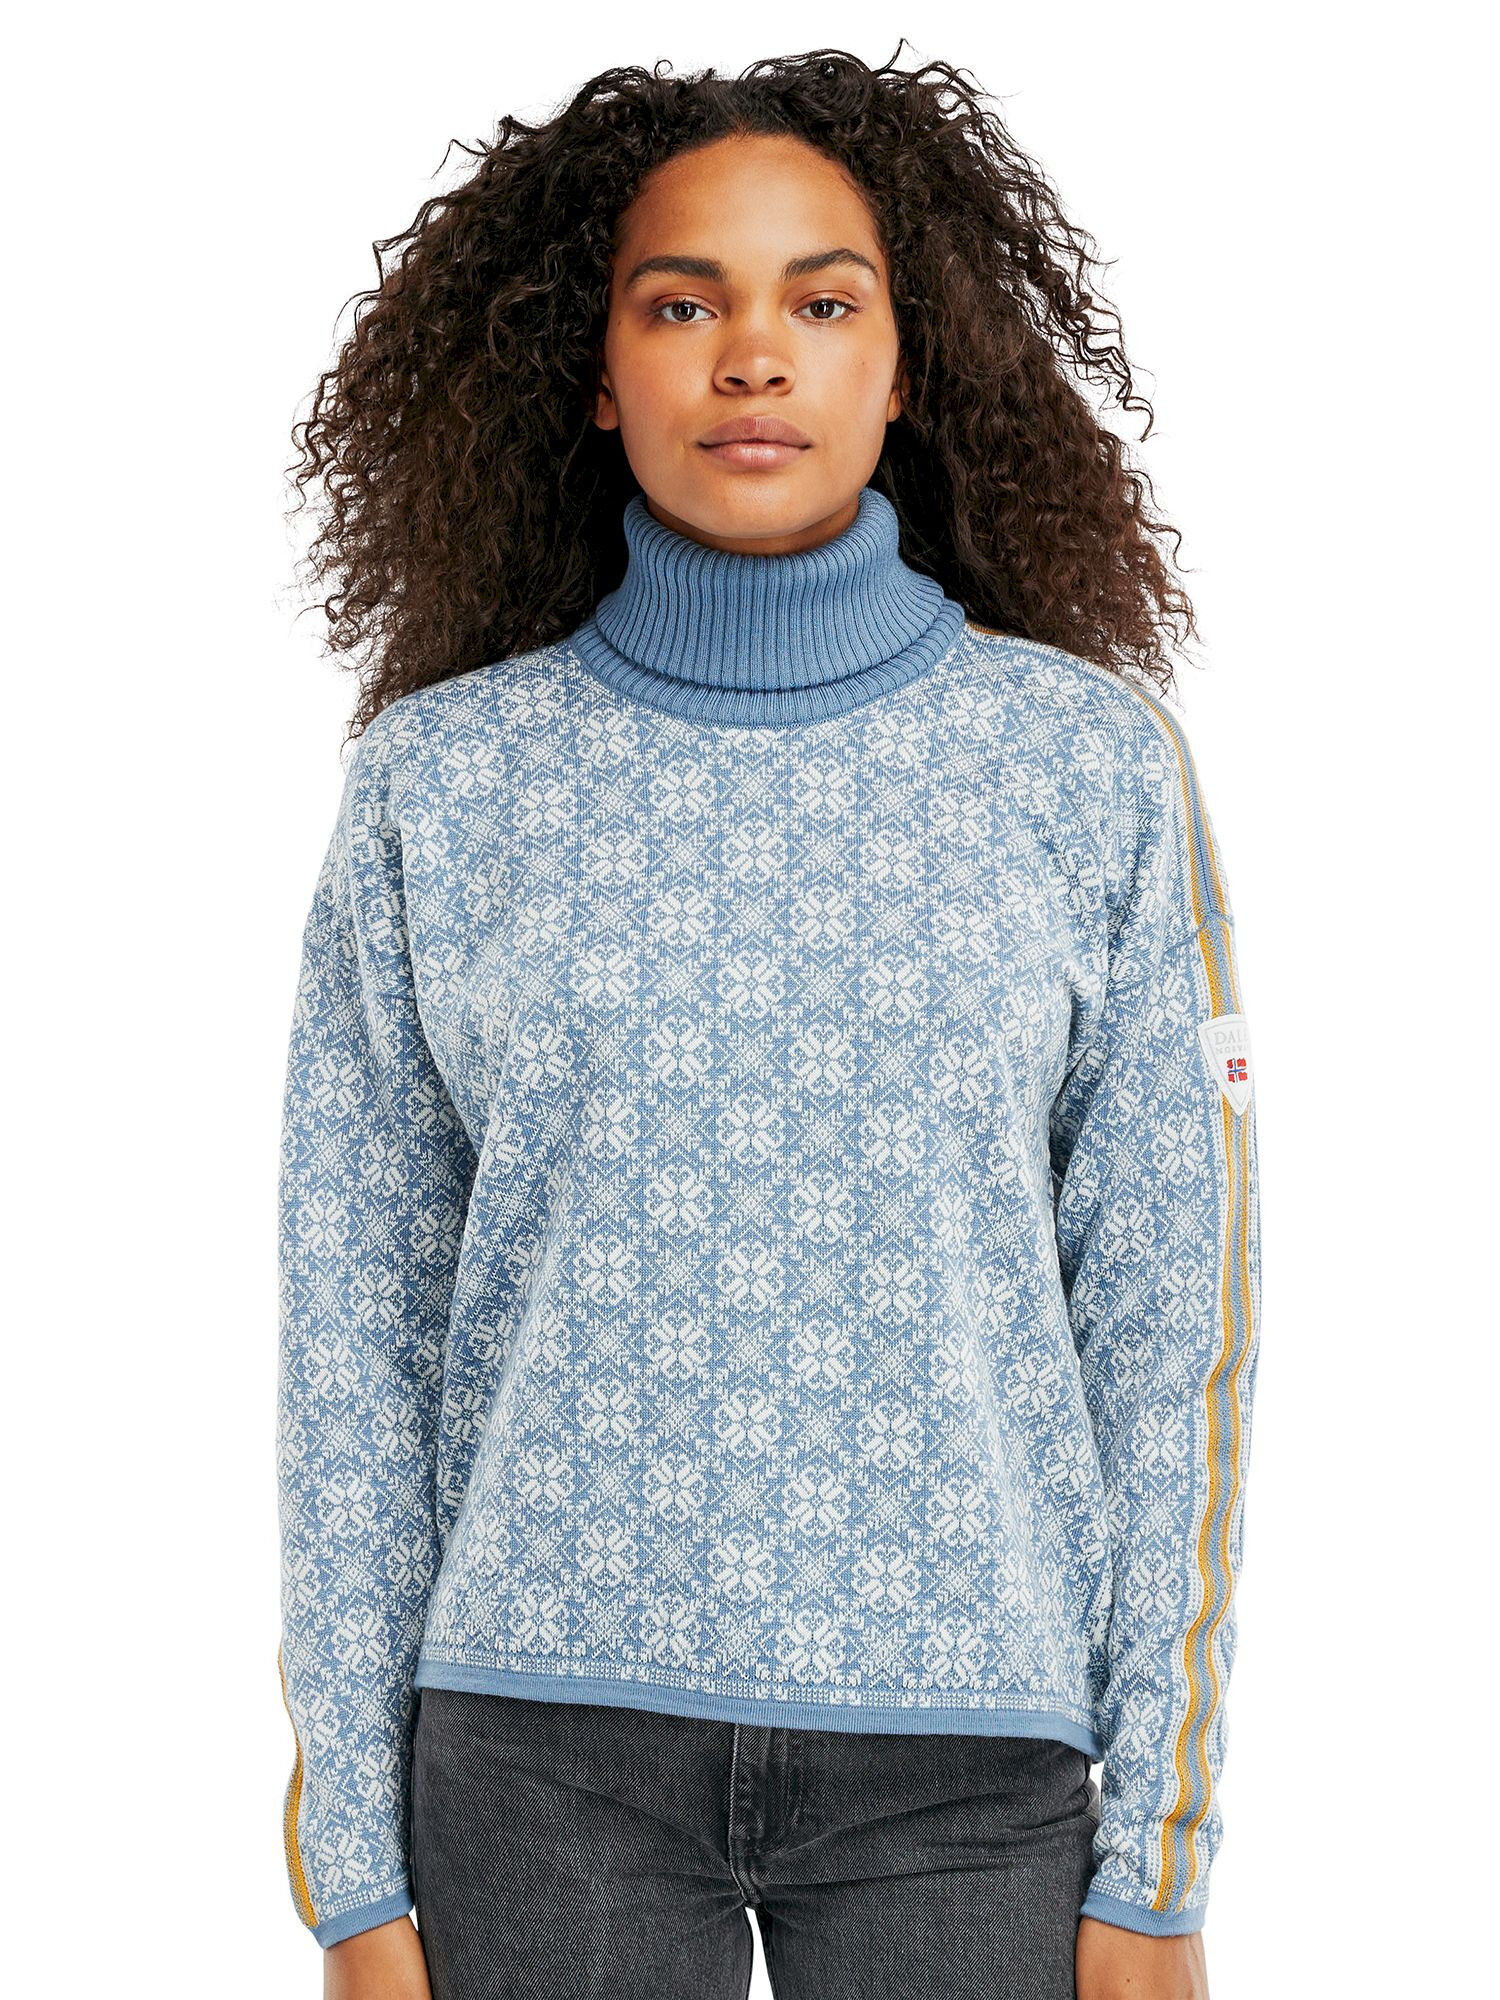 Dale of Norway Frida Sweater  - Pullover - Damen